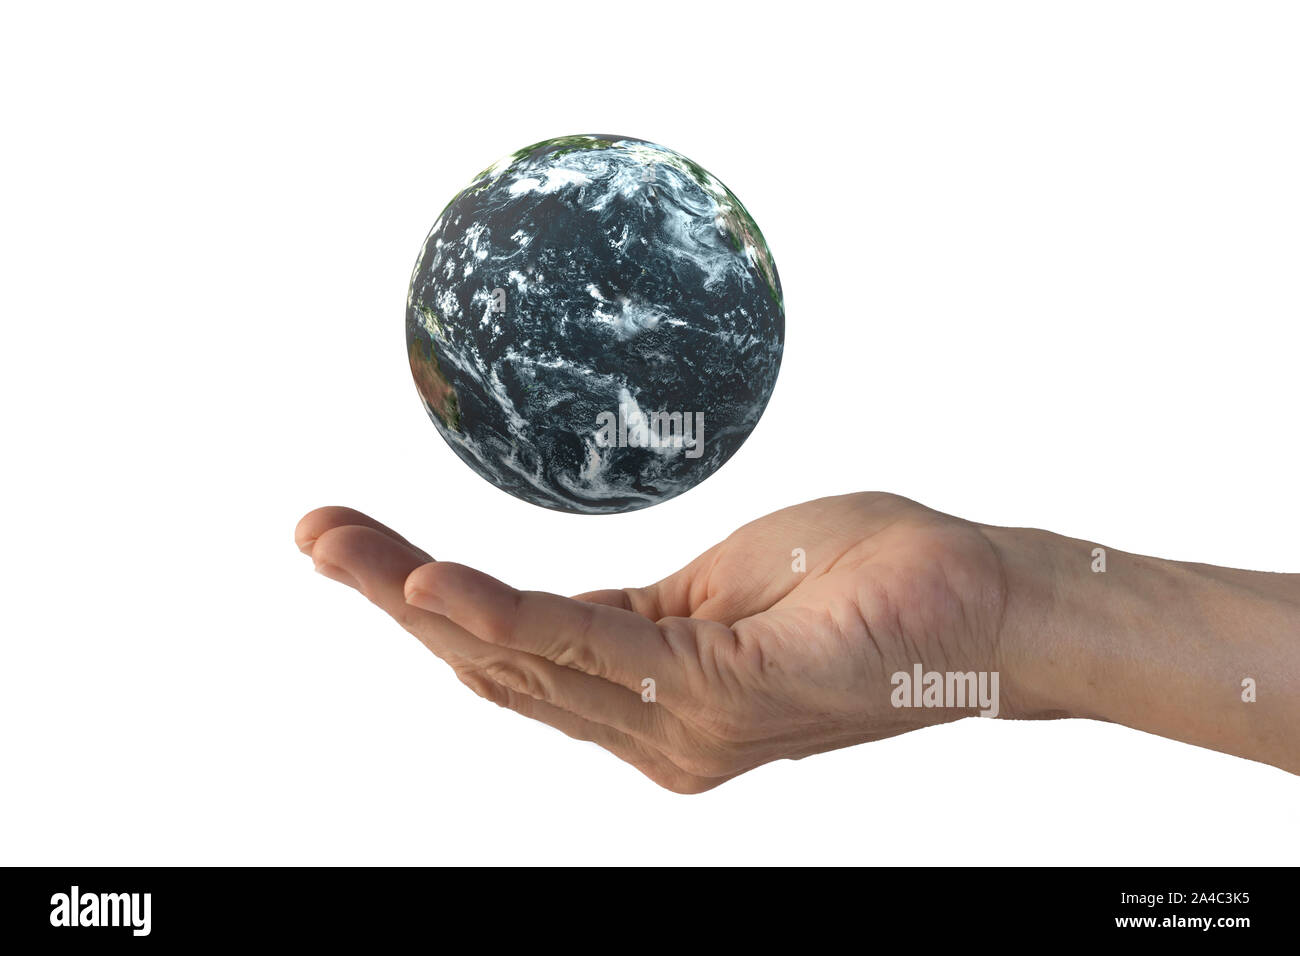 Planet Earth floating on human hand, isolated on a white background Stock Photo